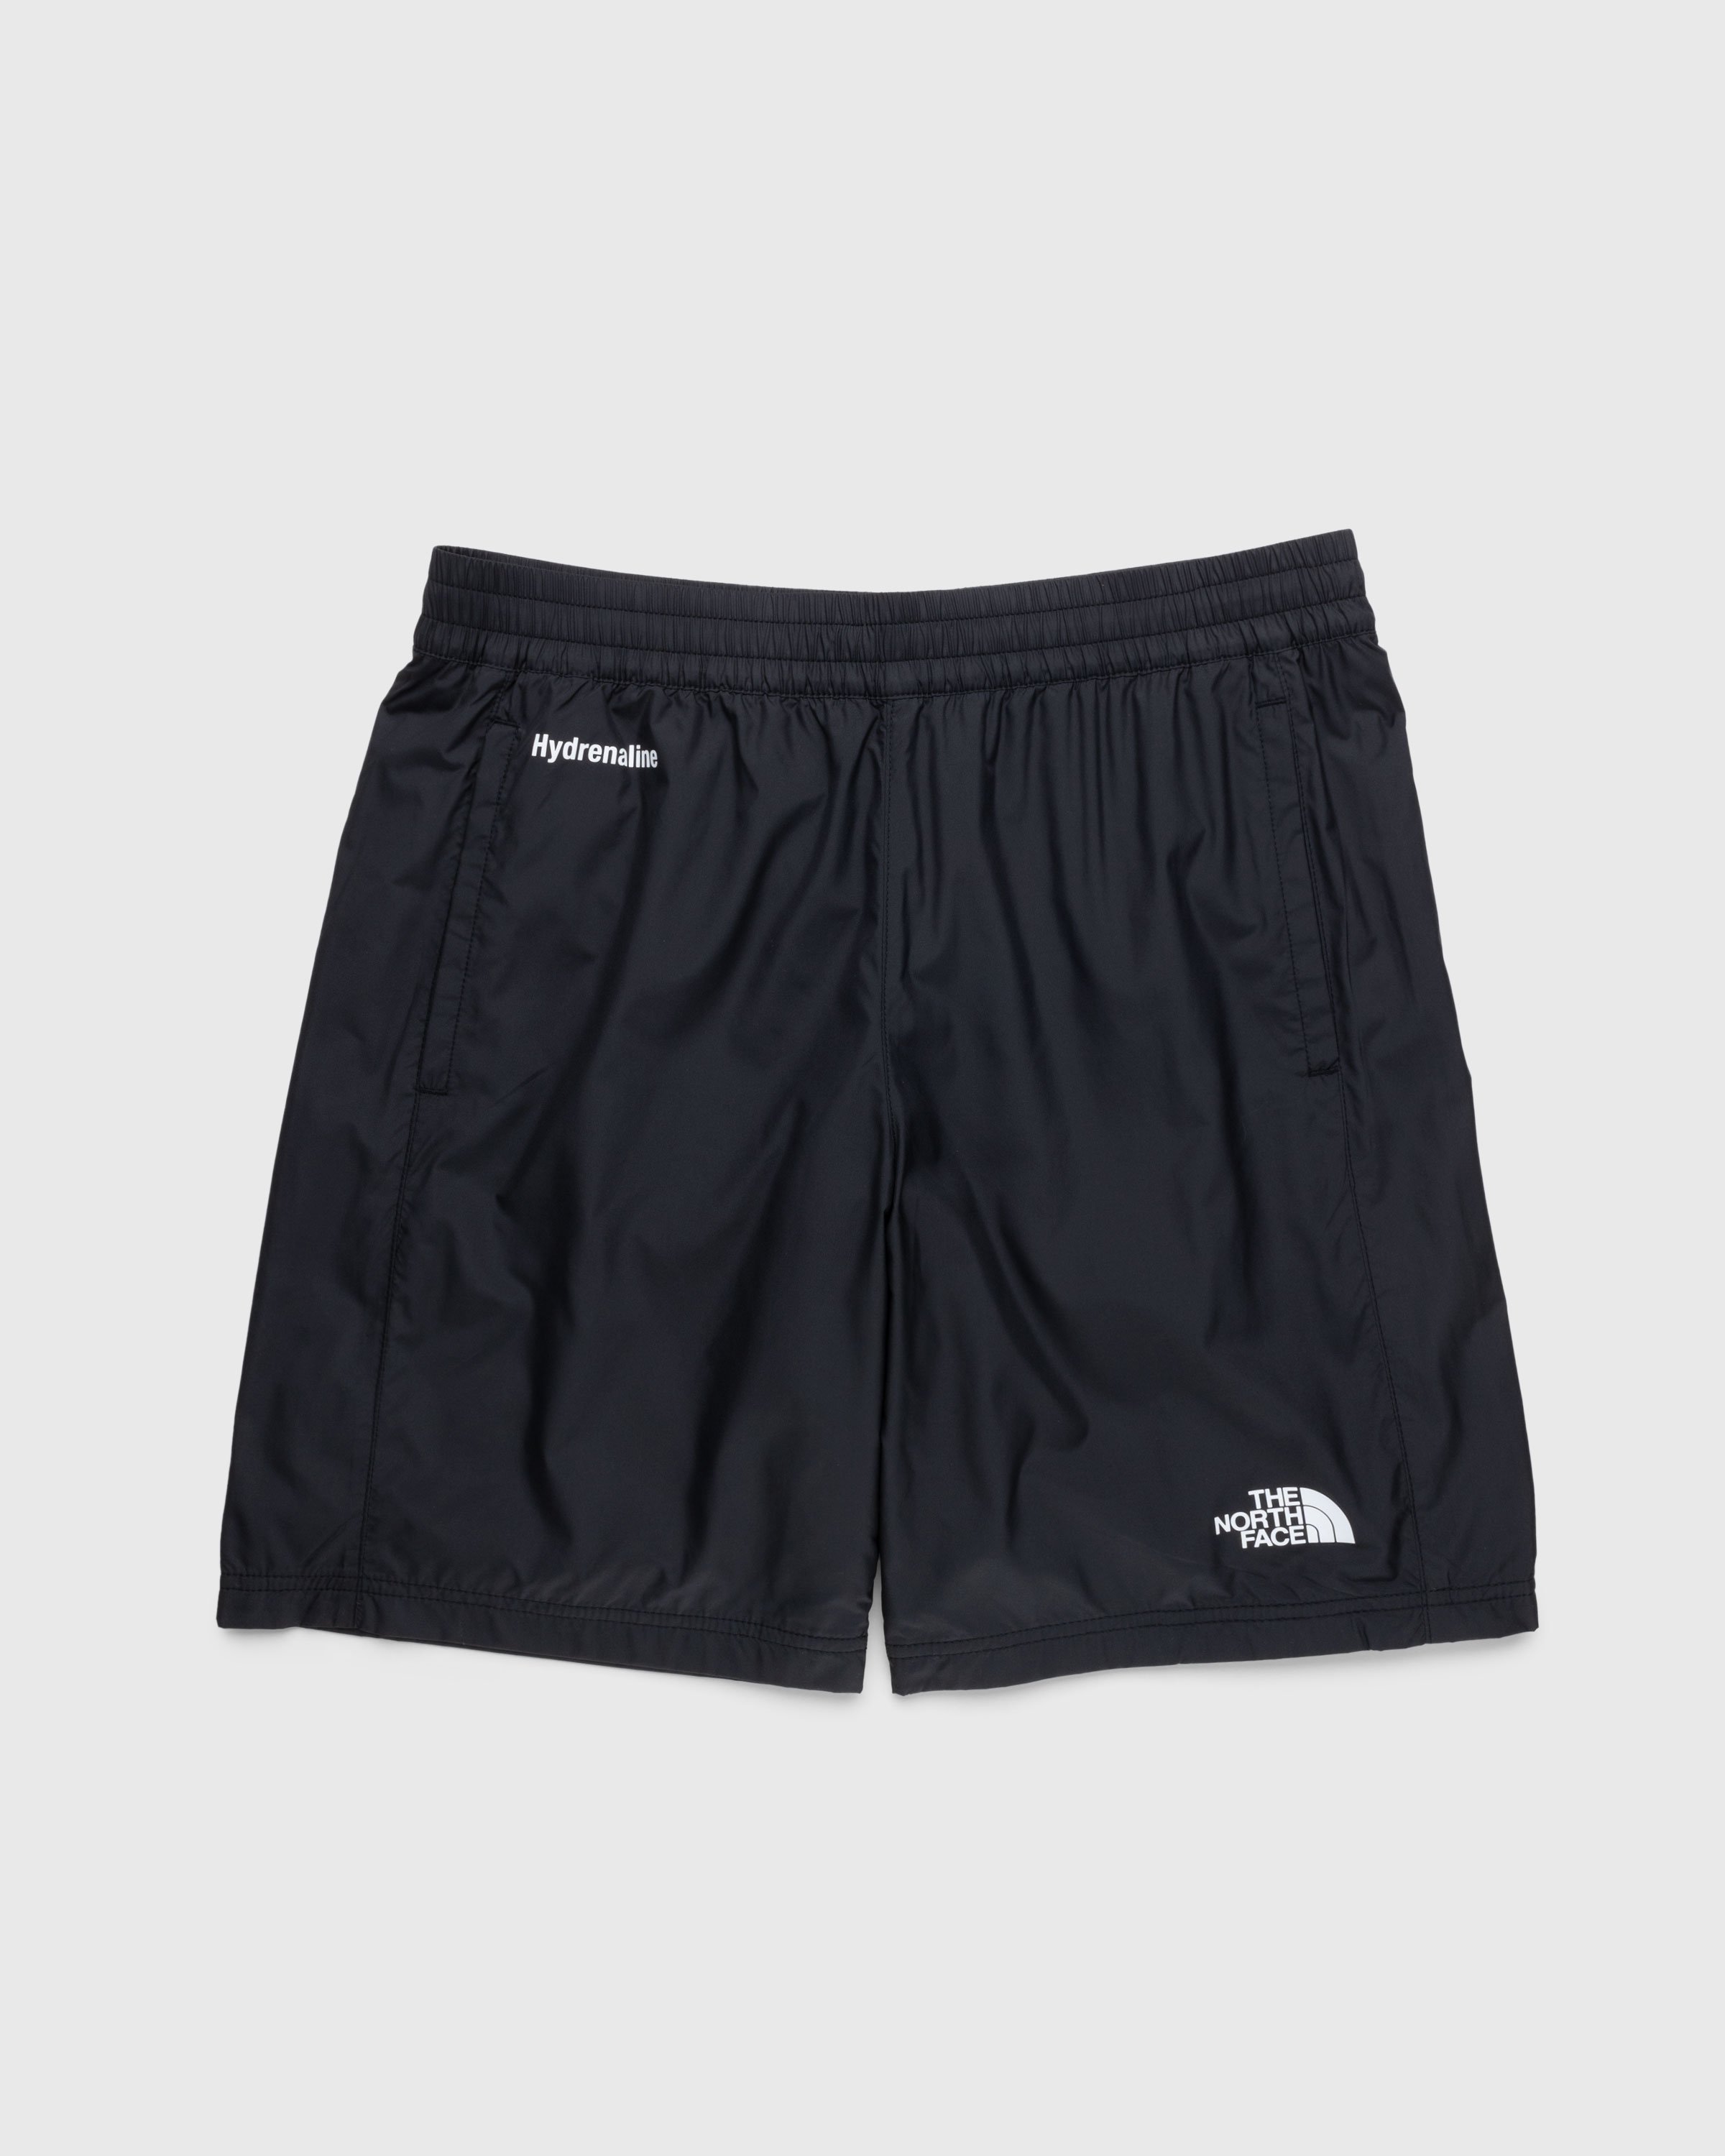 The North Face - Hydrenaline Short TNF Black - Clothing - Black - Image 1